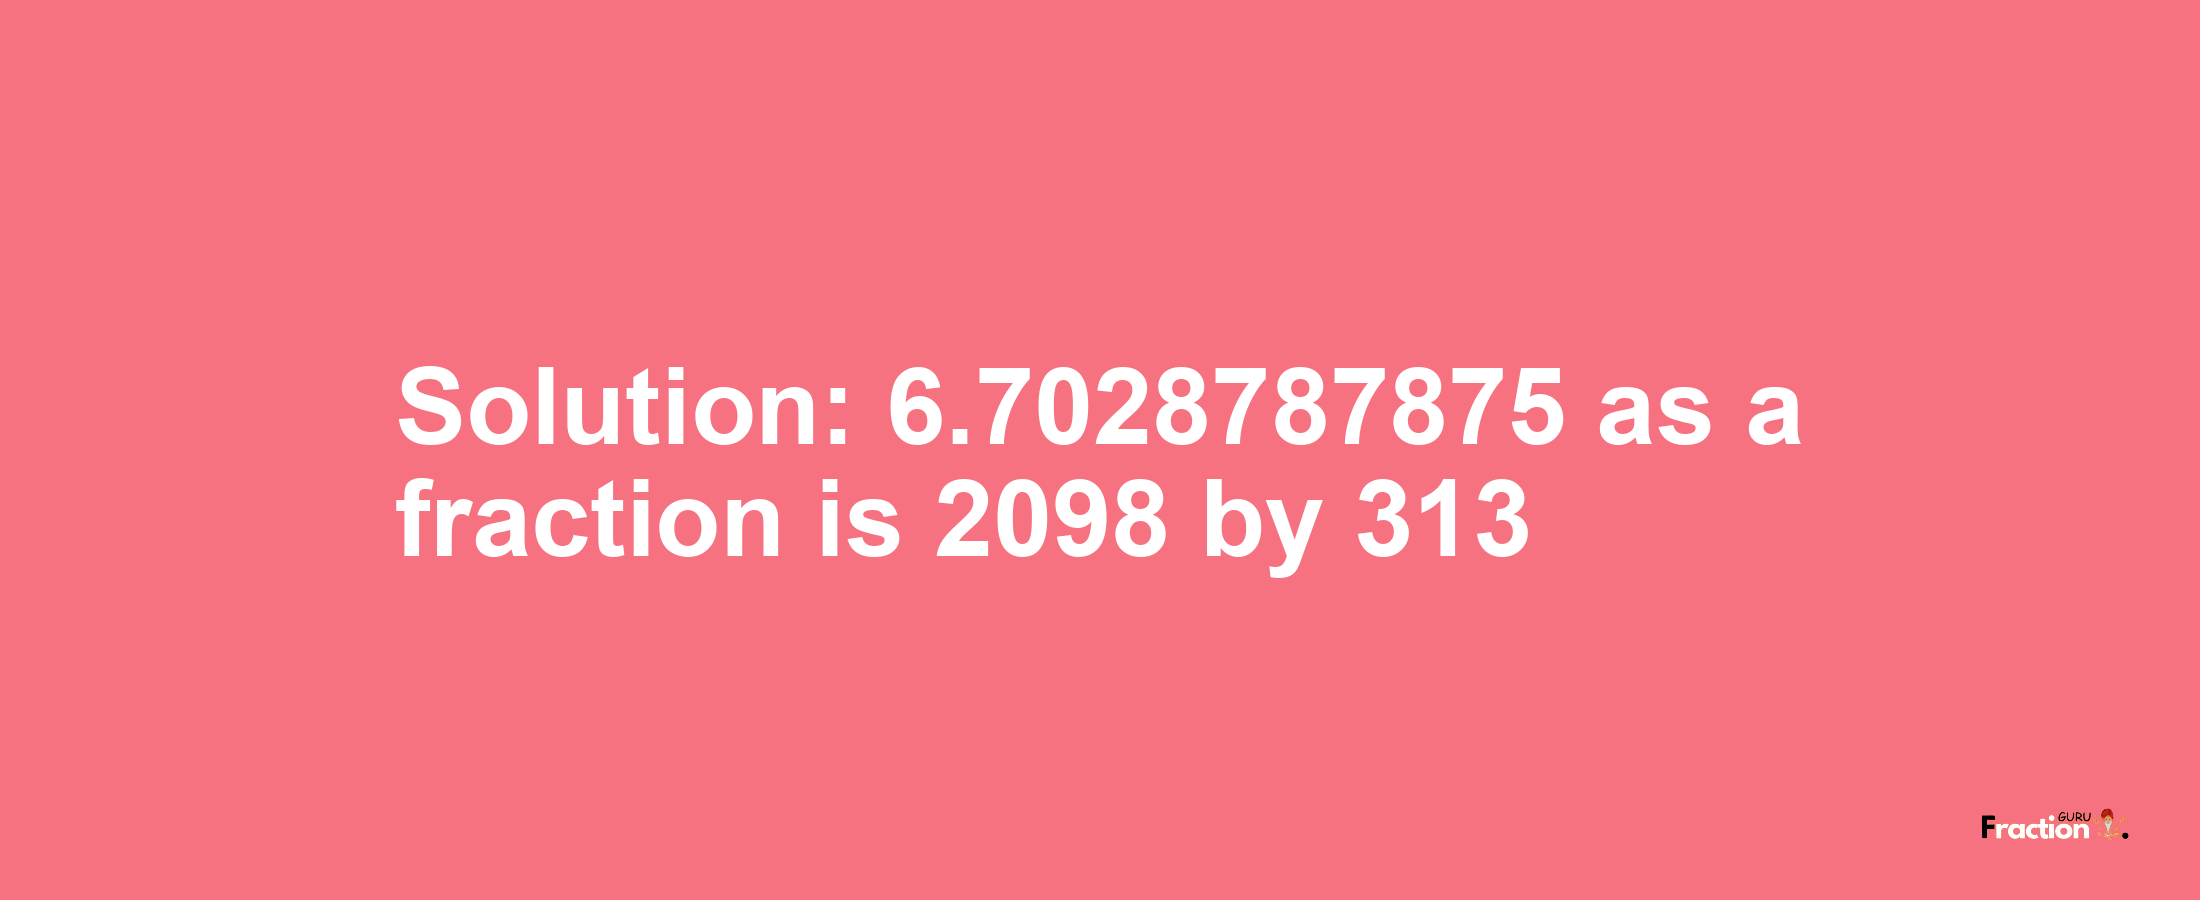 Solution:6.7028787875 as a fraction is 2098/313